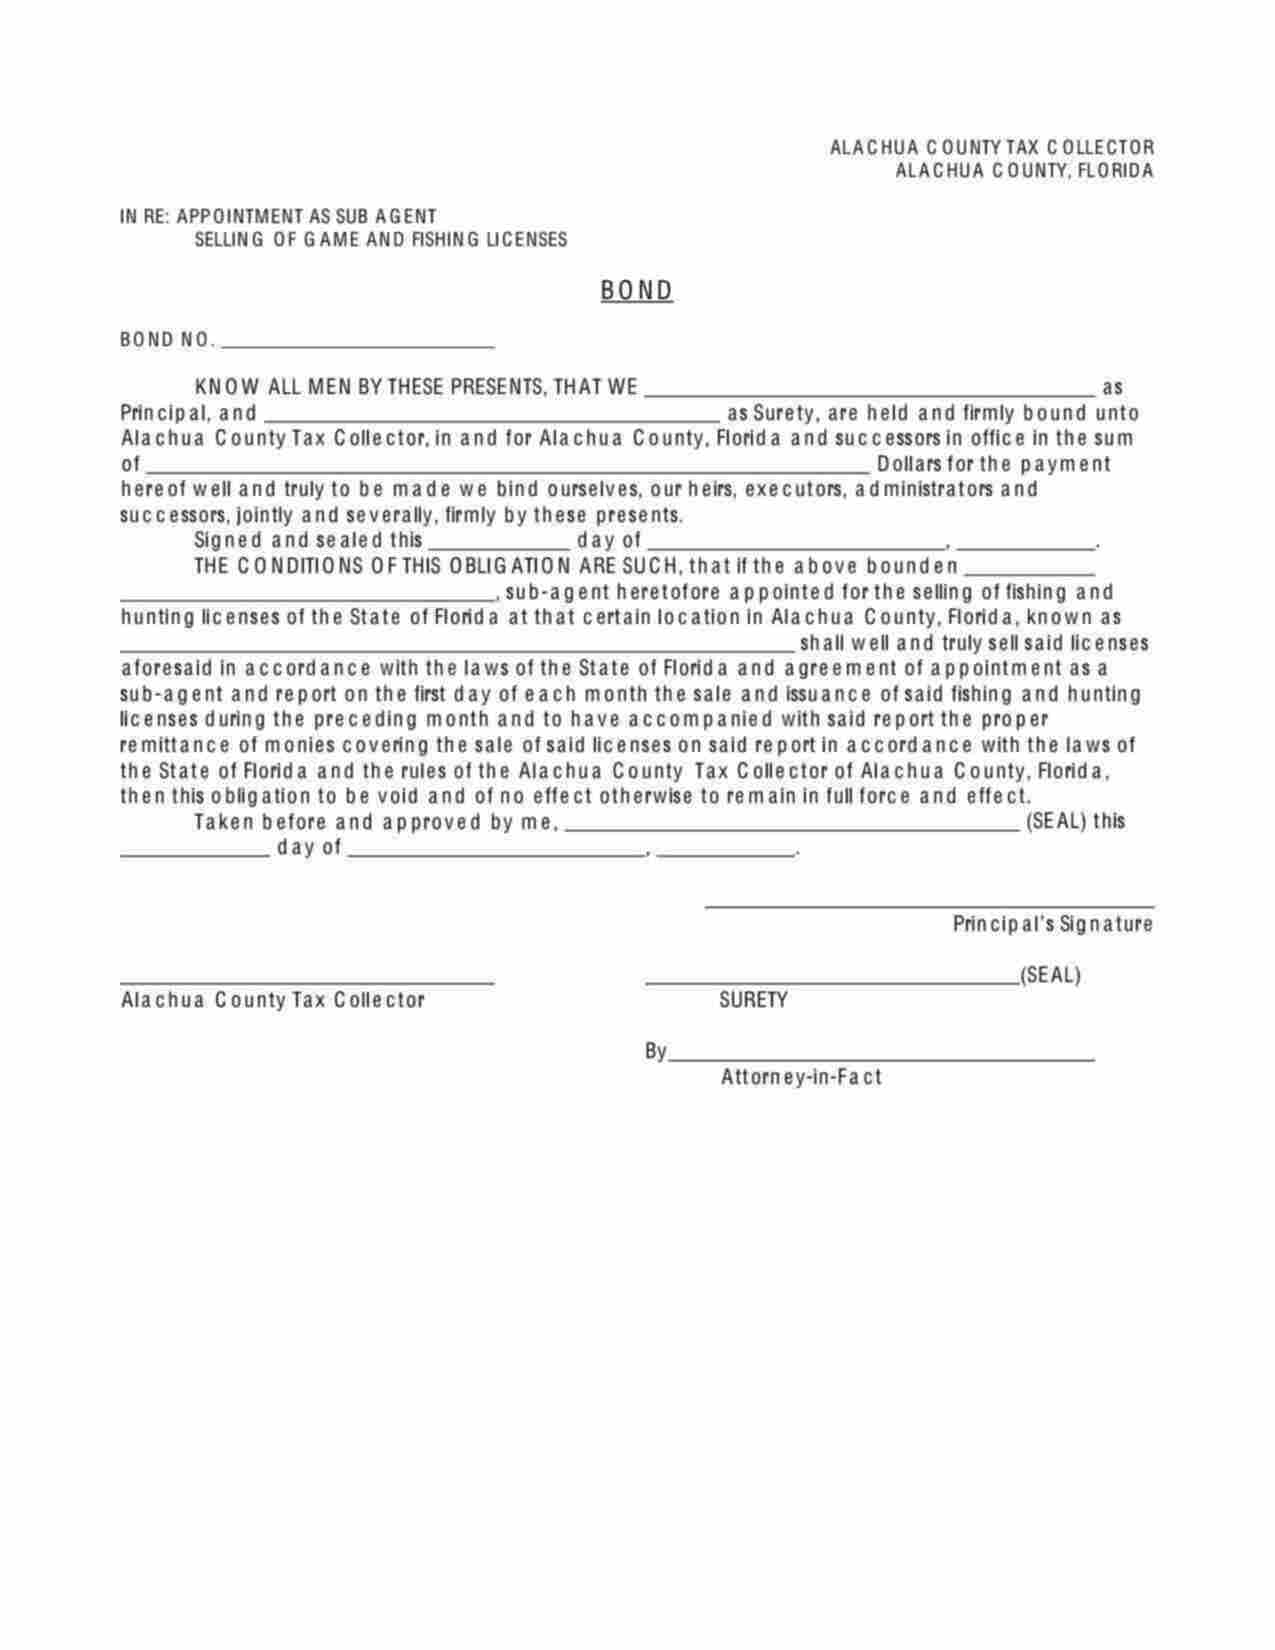 Florida Game and Fishing License Sub Agent Bond Form